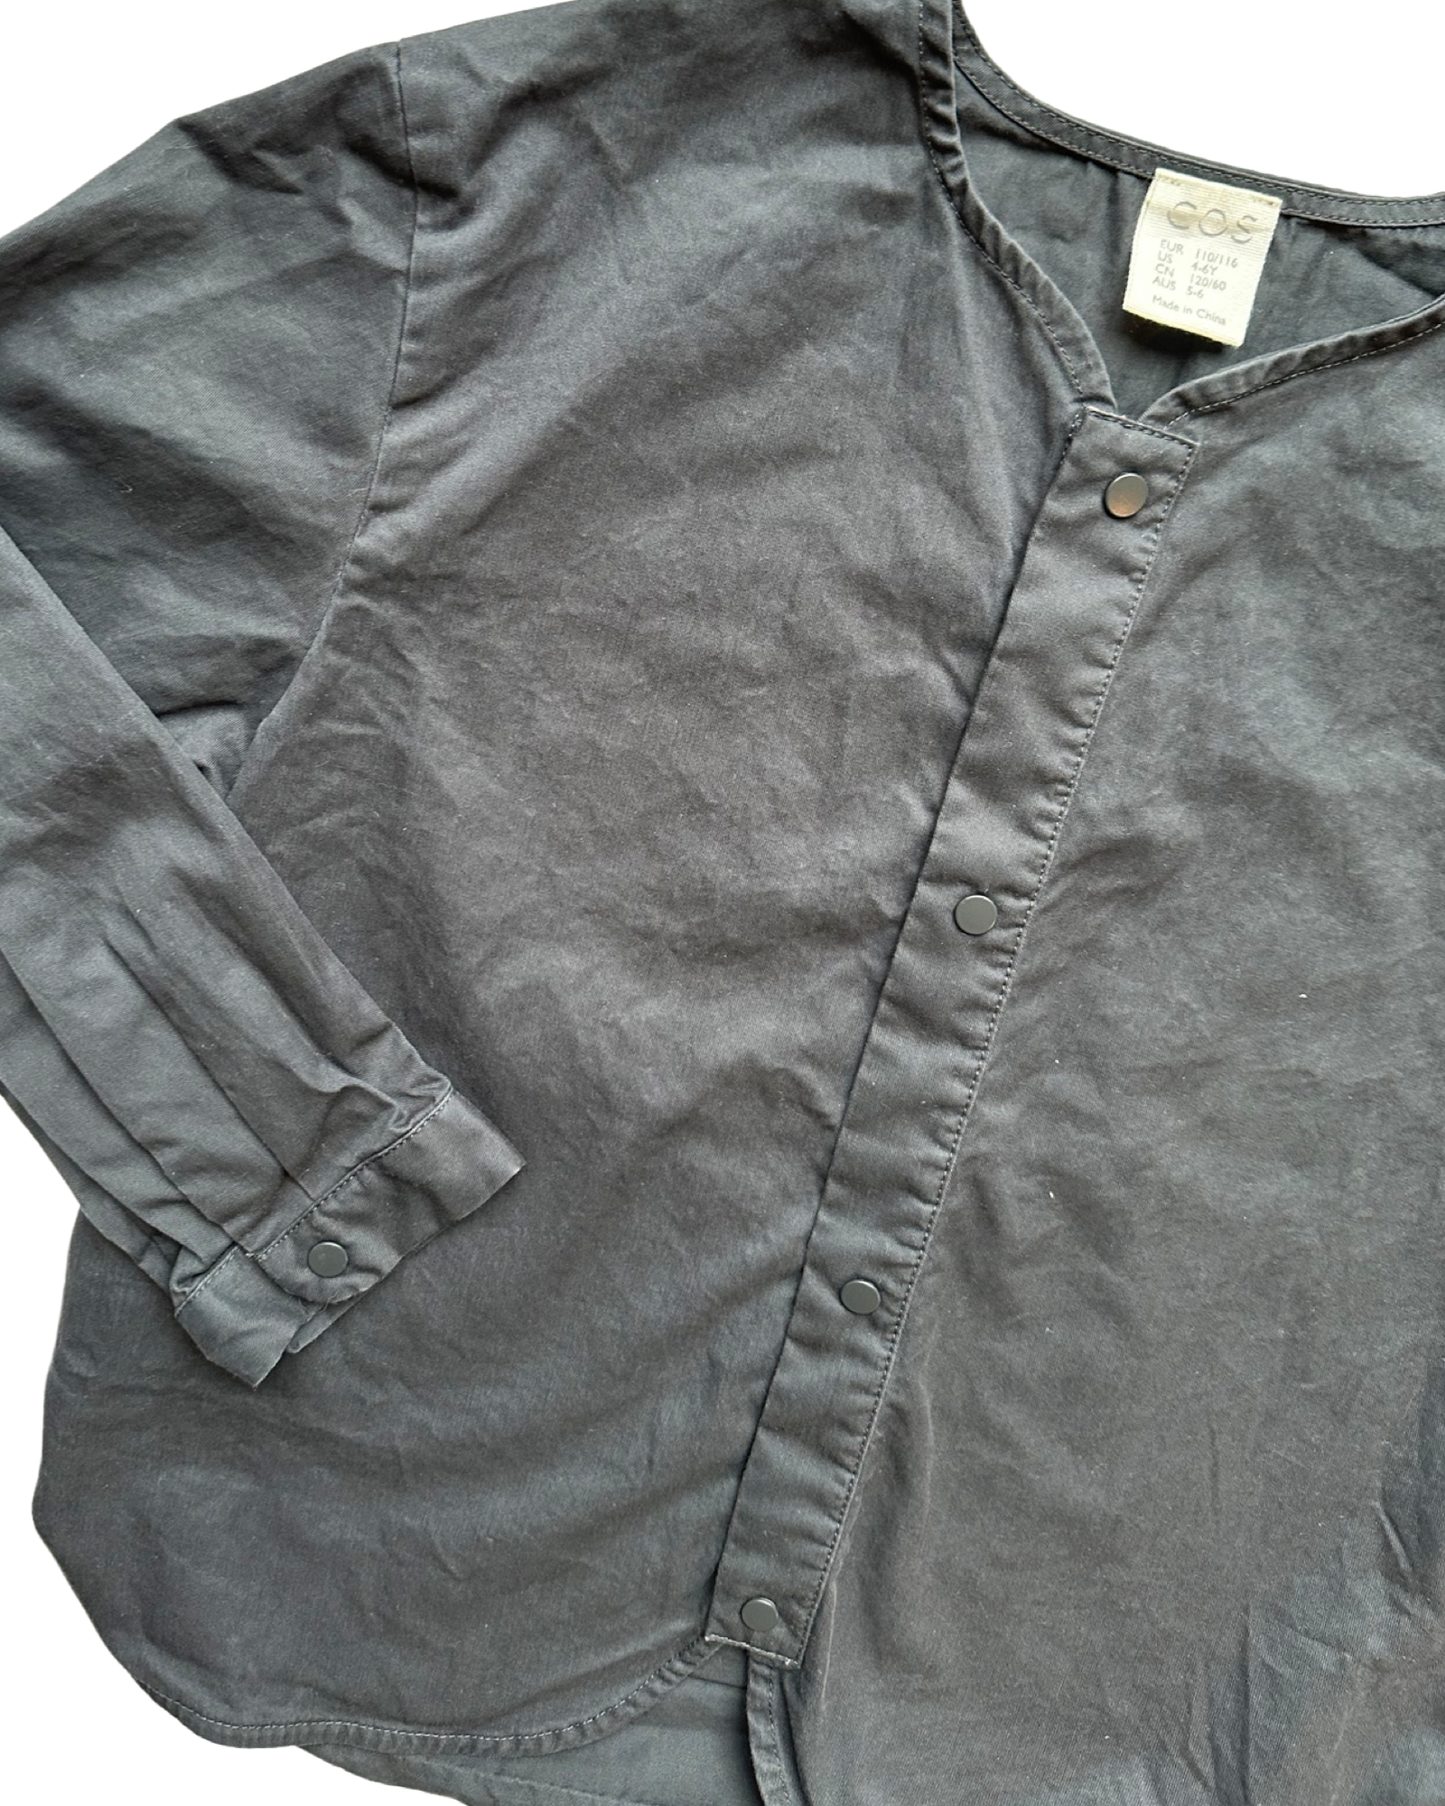 Cos kids woven cotton shirt in charcoal (size 4-6yrs)